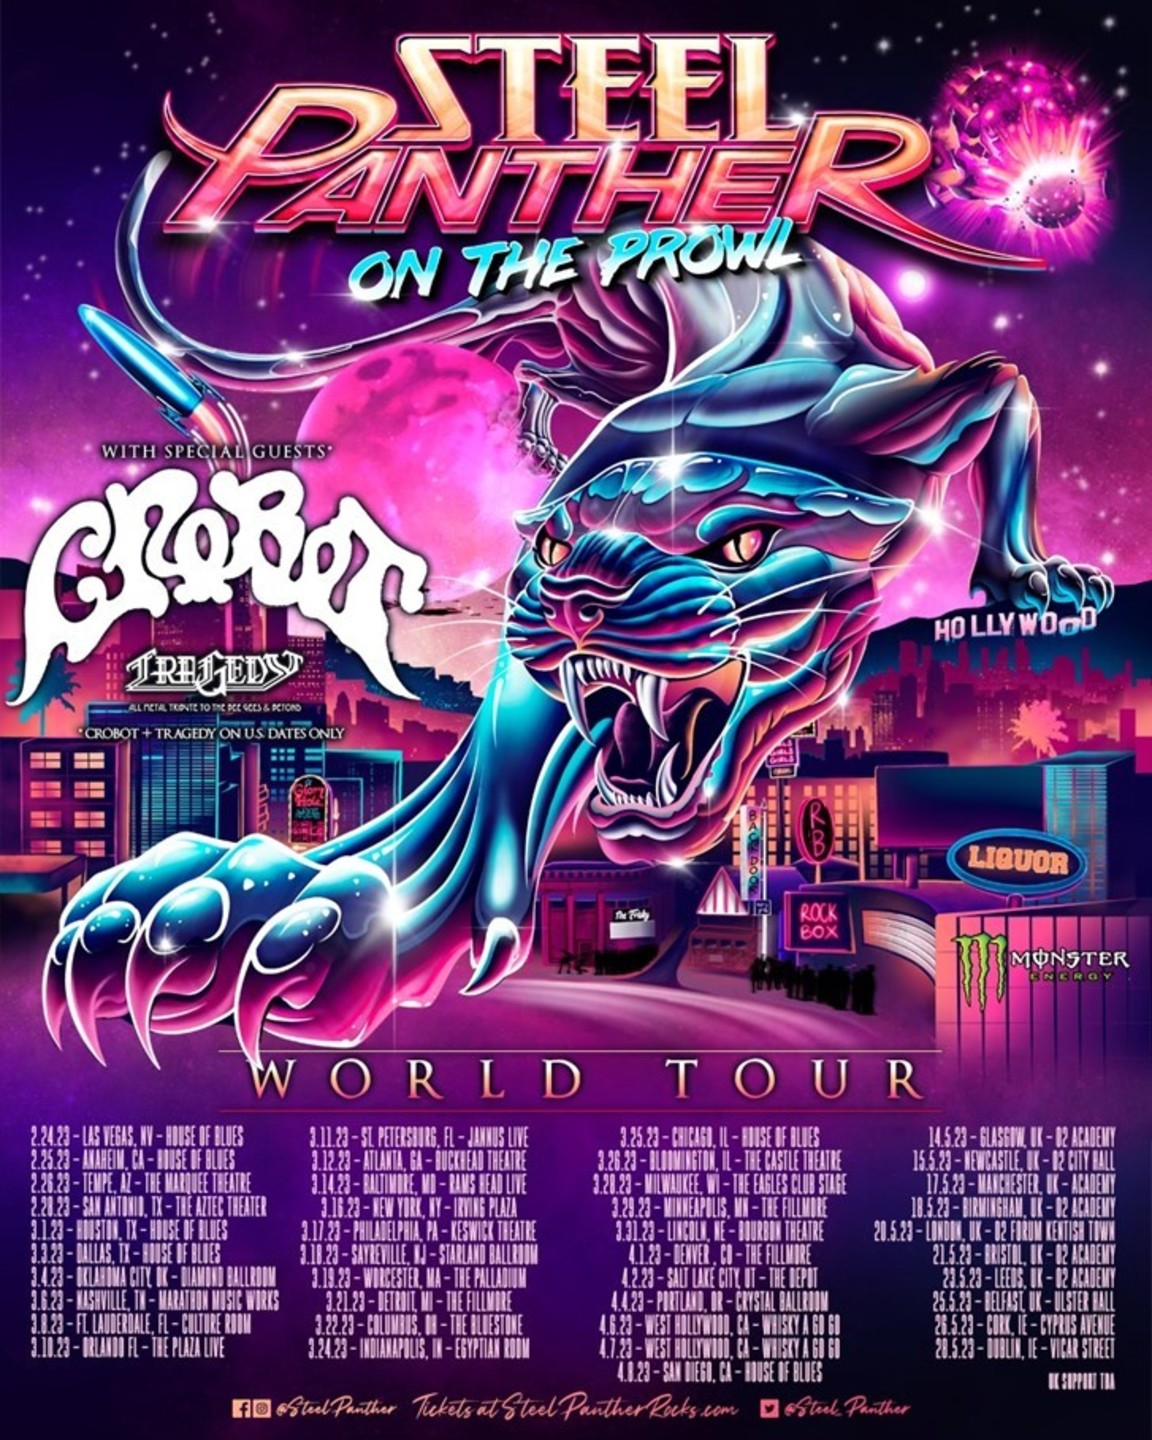 Steel Panther Release New Video Tour Dates Outsider Rock